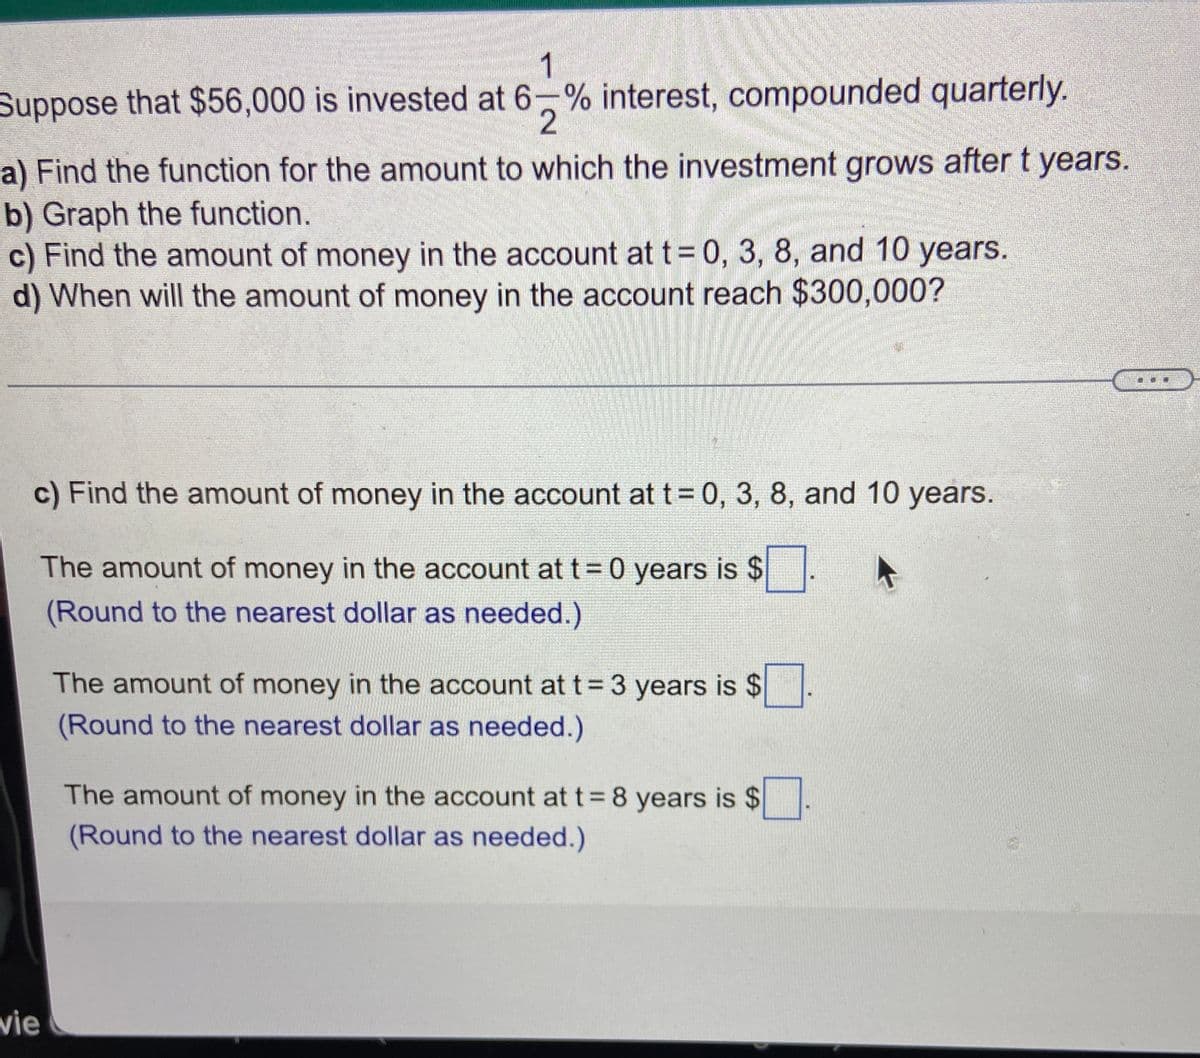 1
Suppose that $56,000 is invested at 6-% interest, compounded quarterly.
2
a) Find the function for the amount to which the investment grows after t years.
b) Graph the function.
c) Find the amount of money in the account at t= 0, 3, 8, and 10 years.
d) When will the amount of money in the account reach $300,000?
c) Find the amount of money in the account at t= 0, 3, 8, and 10 years.
The amount of money in the account at t= 0 years is $
(Round to the nearest dollar as needed.)
The amount of money in the account at t = 3 years is $
(Round to the nearest dollar as needed.)
The amount of money in the account att 8 years is $
(Round to the nearest dollar as needed.)
vie
